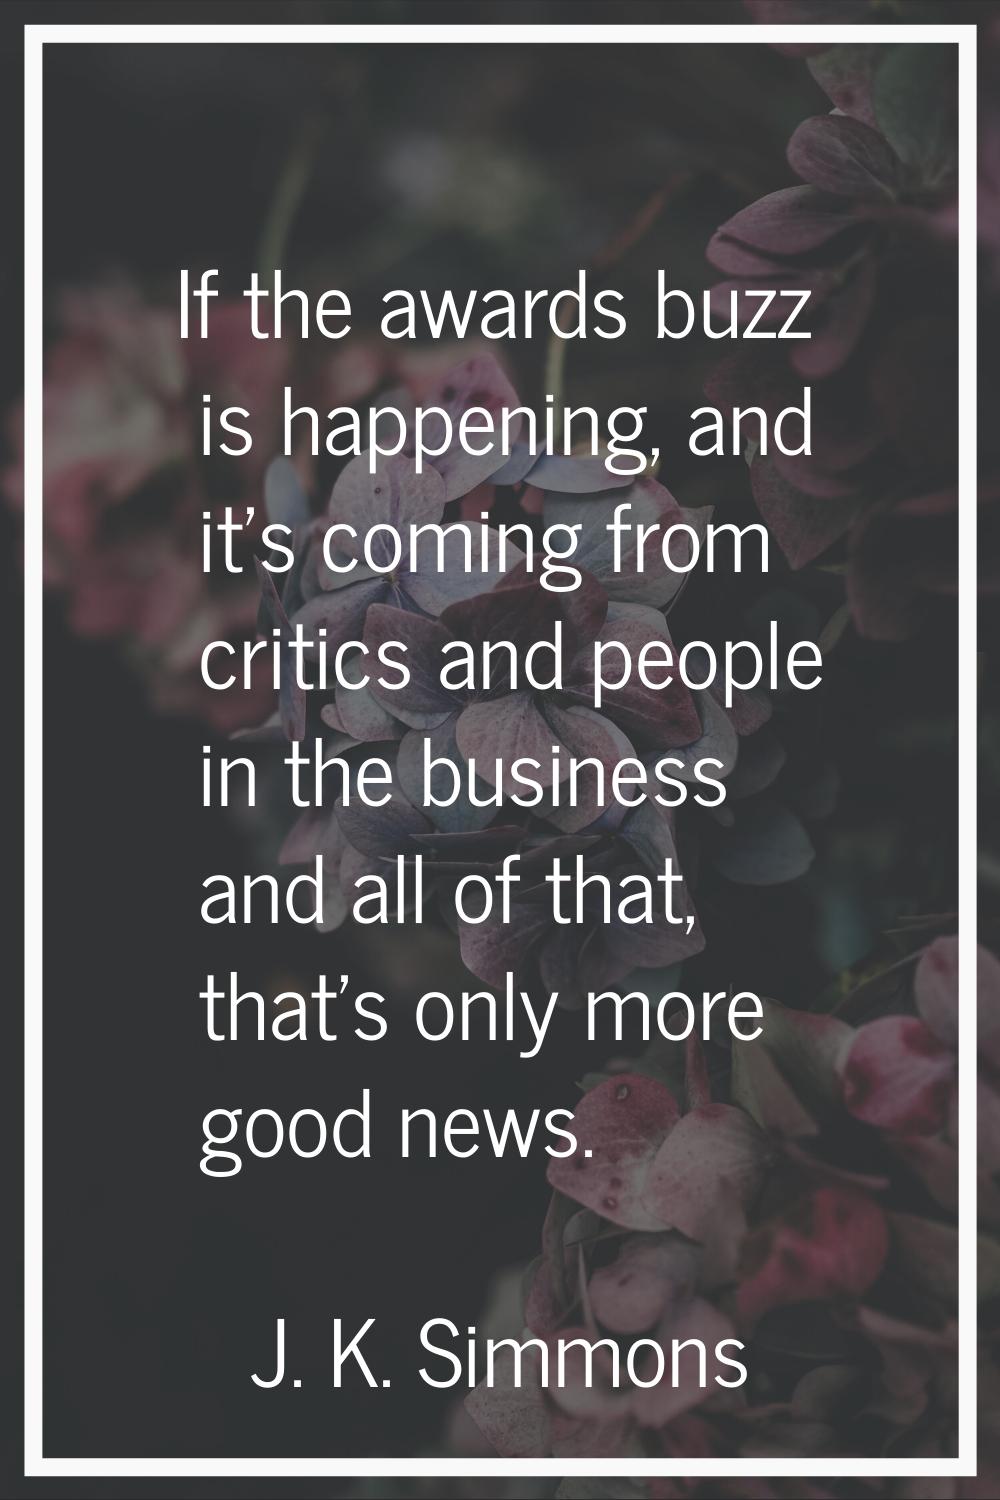 If the awards buzz is happening, and it's coming from critics and people in the business and all of